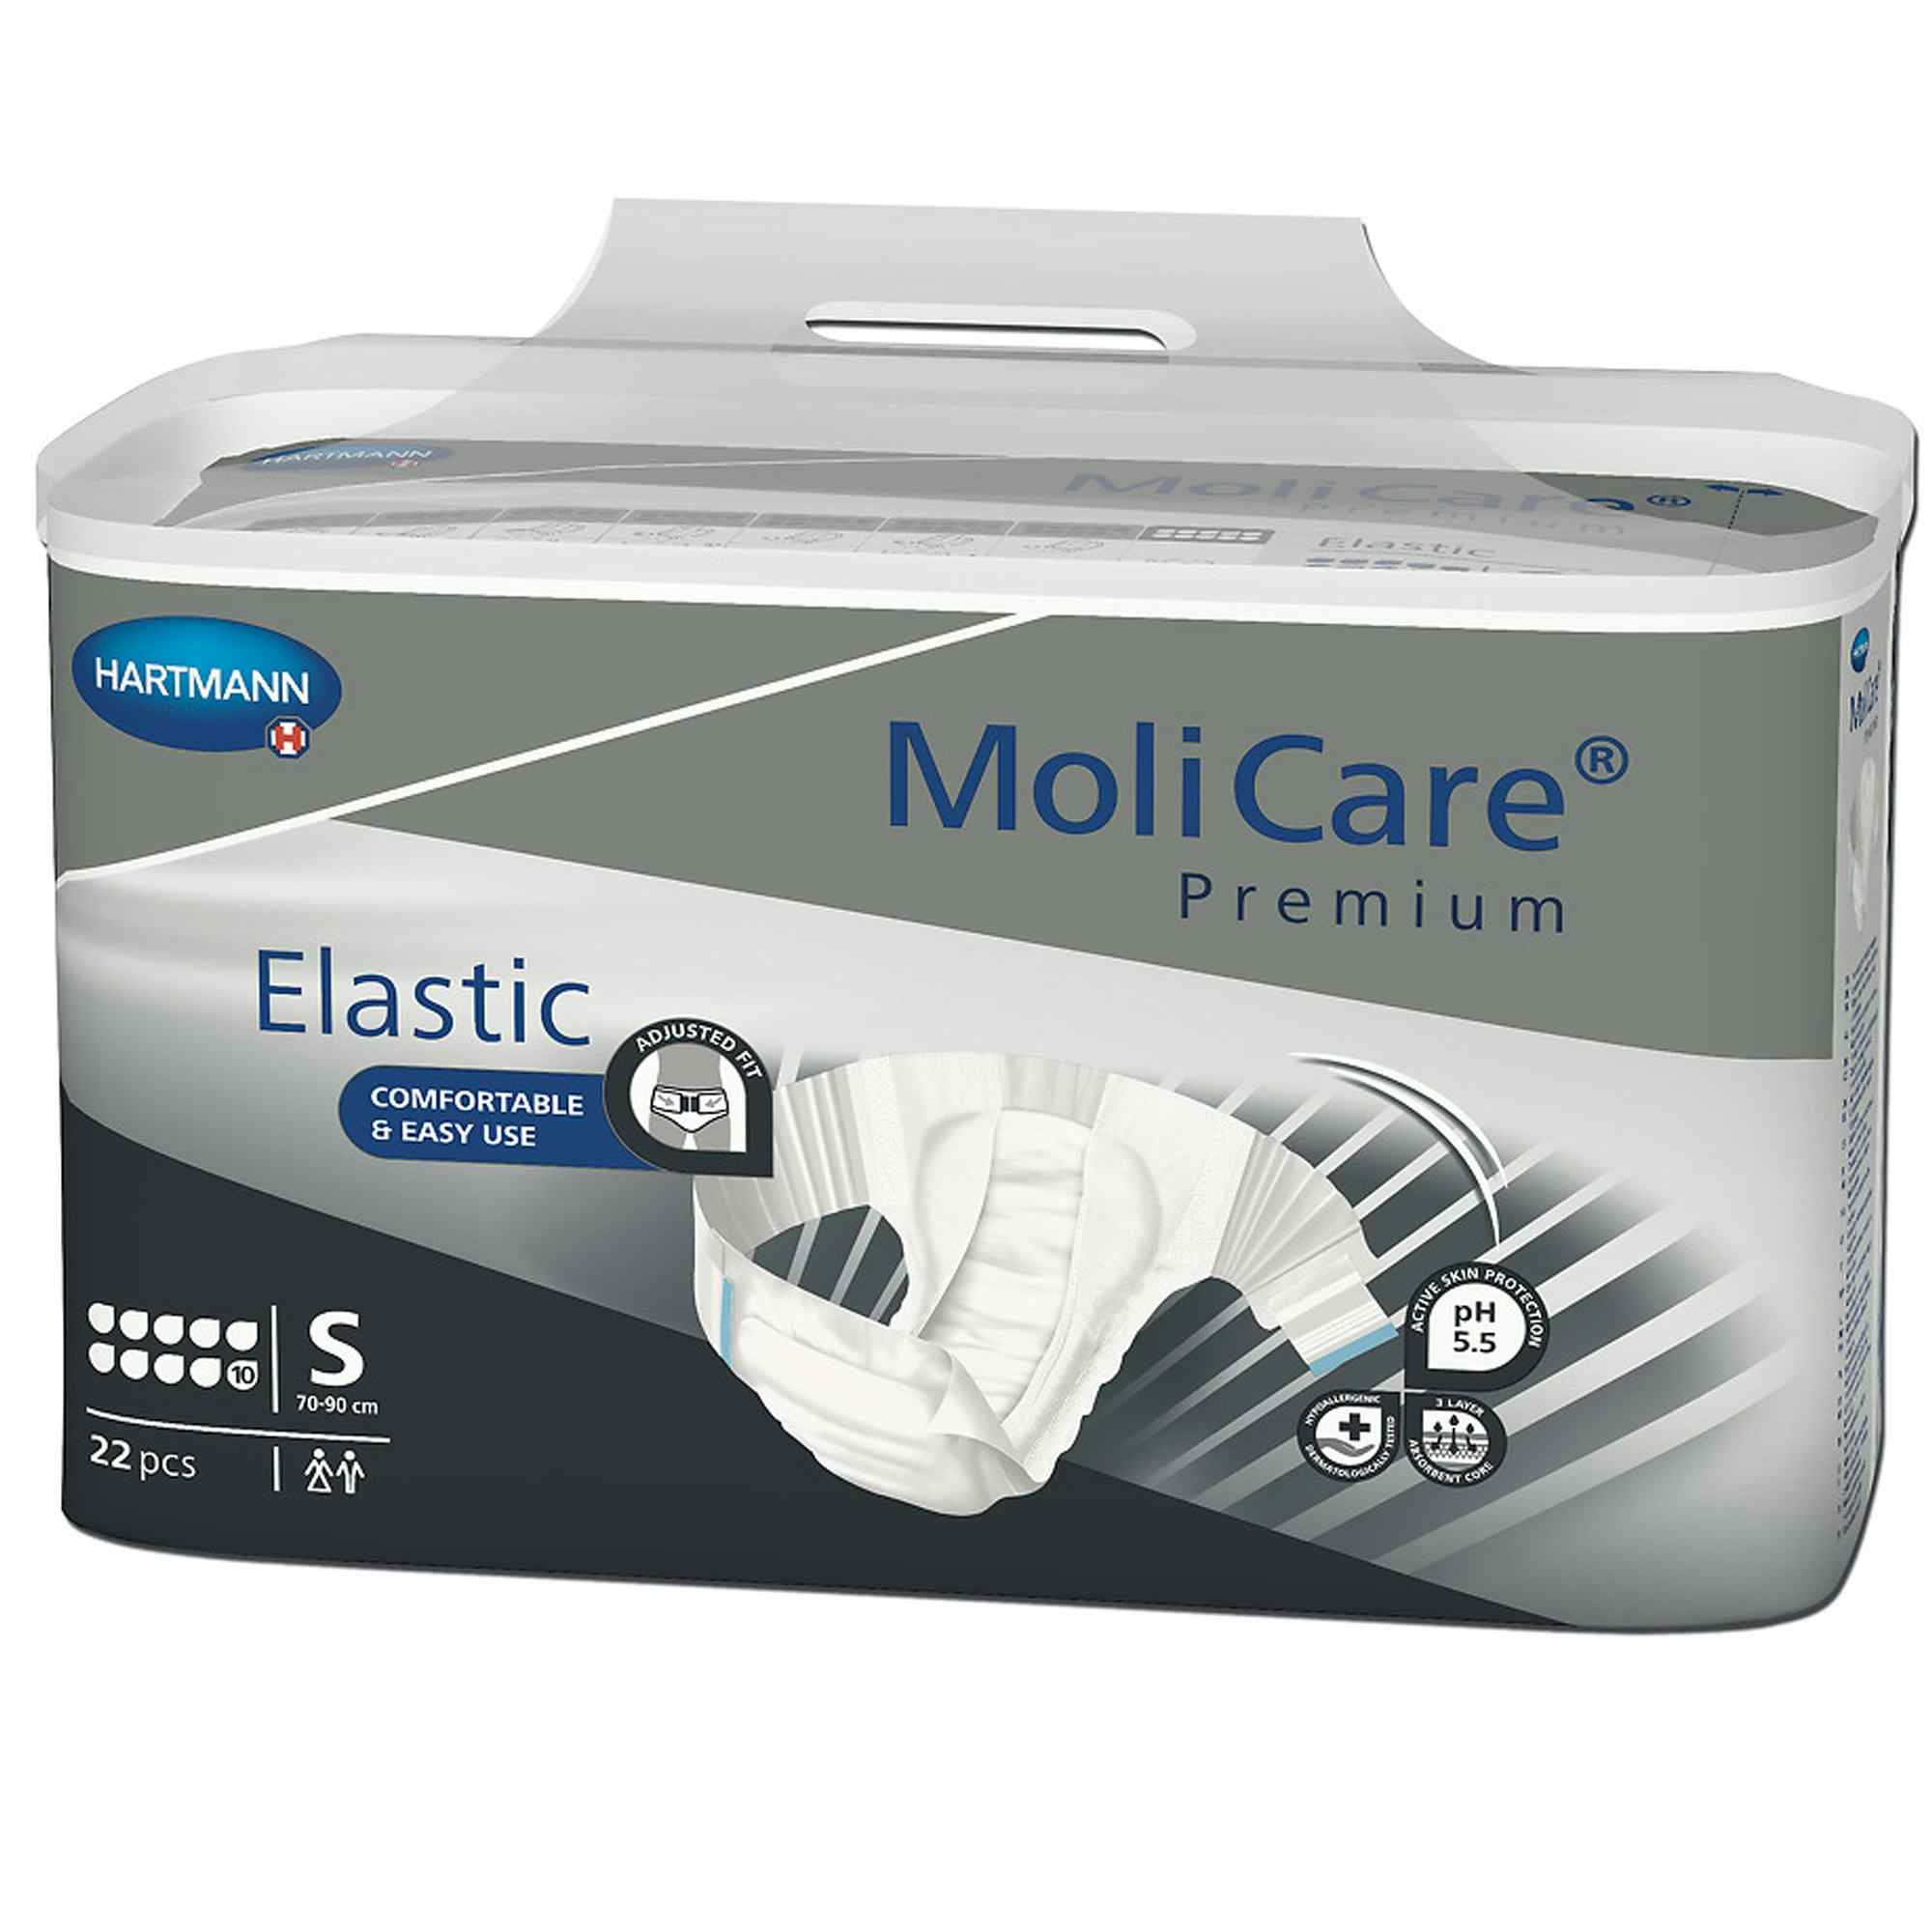 MoliCare Premium 10D Disposable Brief Adult Diapers with Tabs, Heavy Absorbency, 165671, Small (27-35") - Case of 66